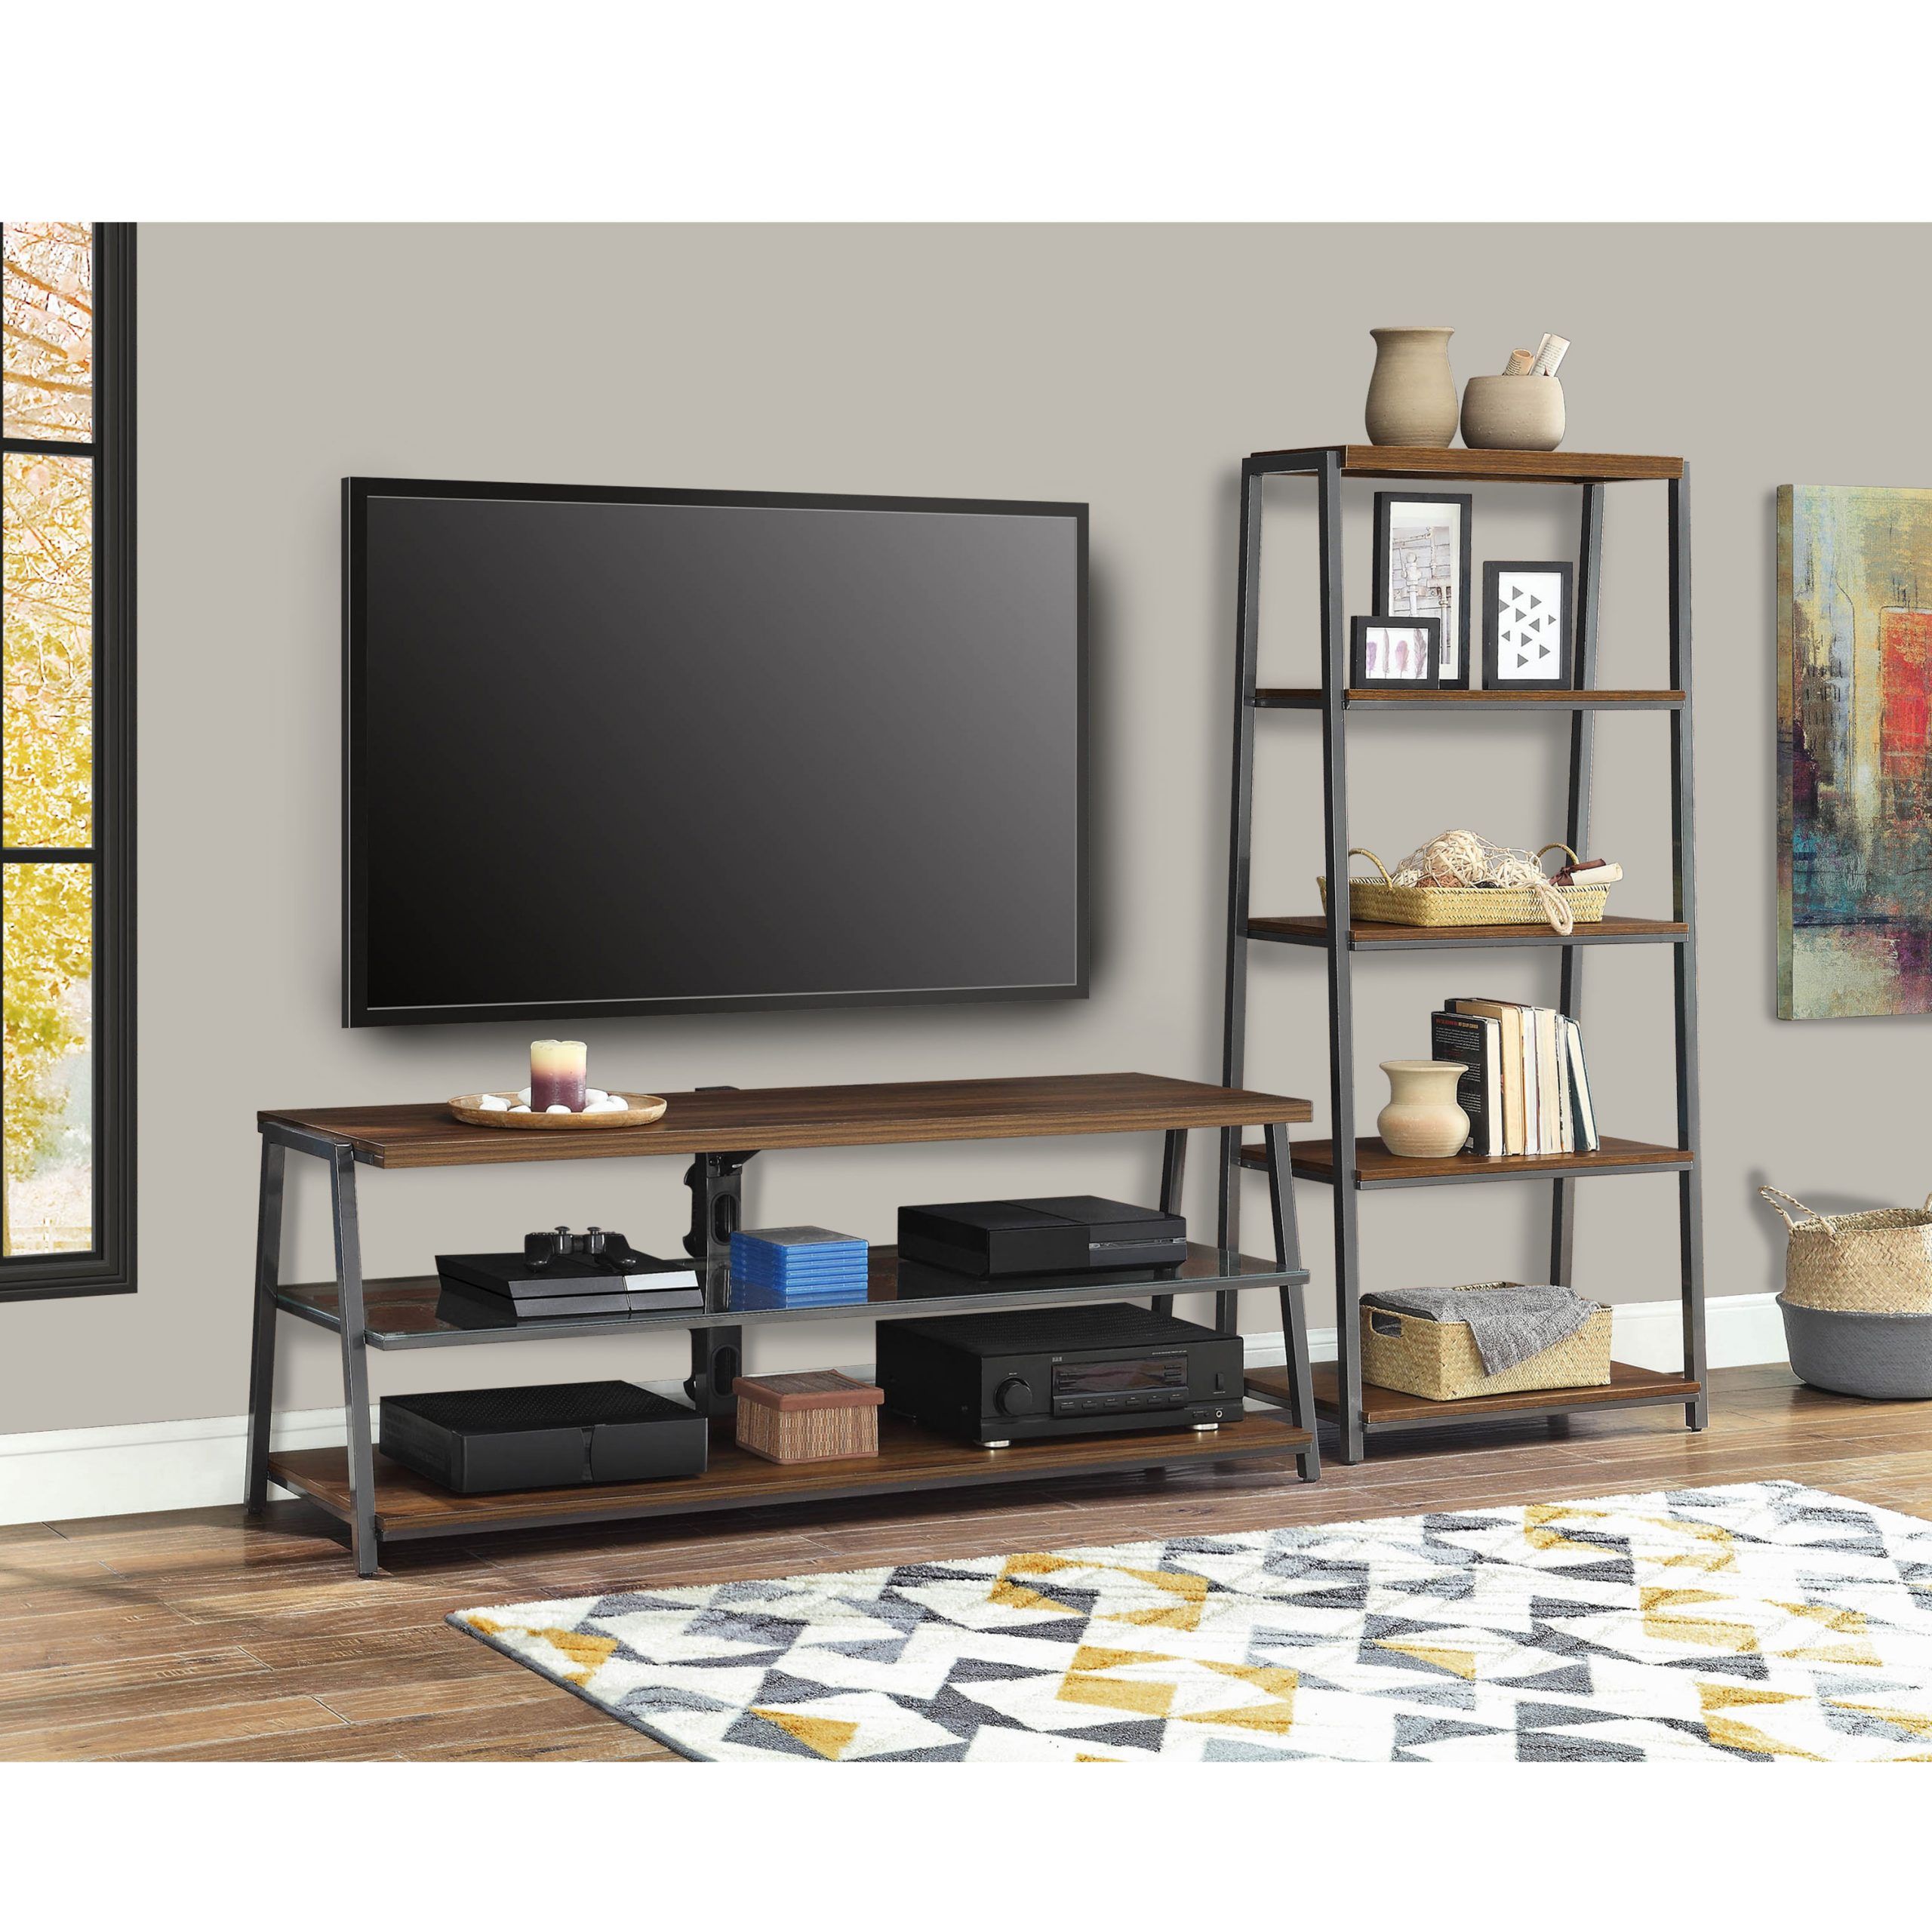 Mainstays Arris Tv Stand For 70" Flat Panel Tvs And 4 For Mainstays Arris 3 In 1 Tv Stands In Canyon Walnut Finish (View 8 of 15)